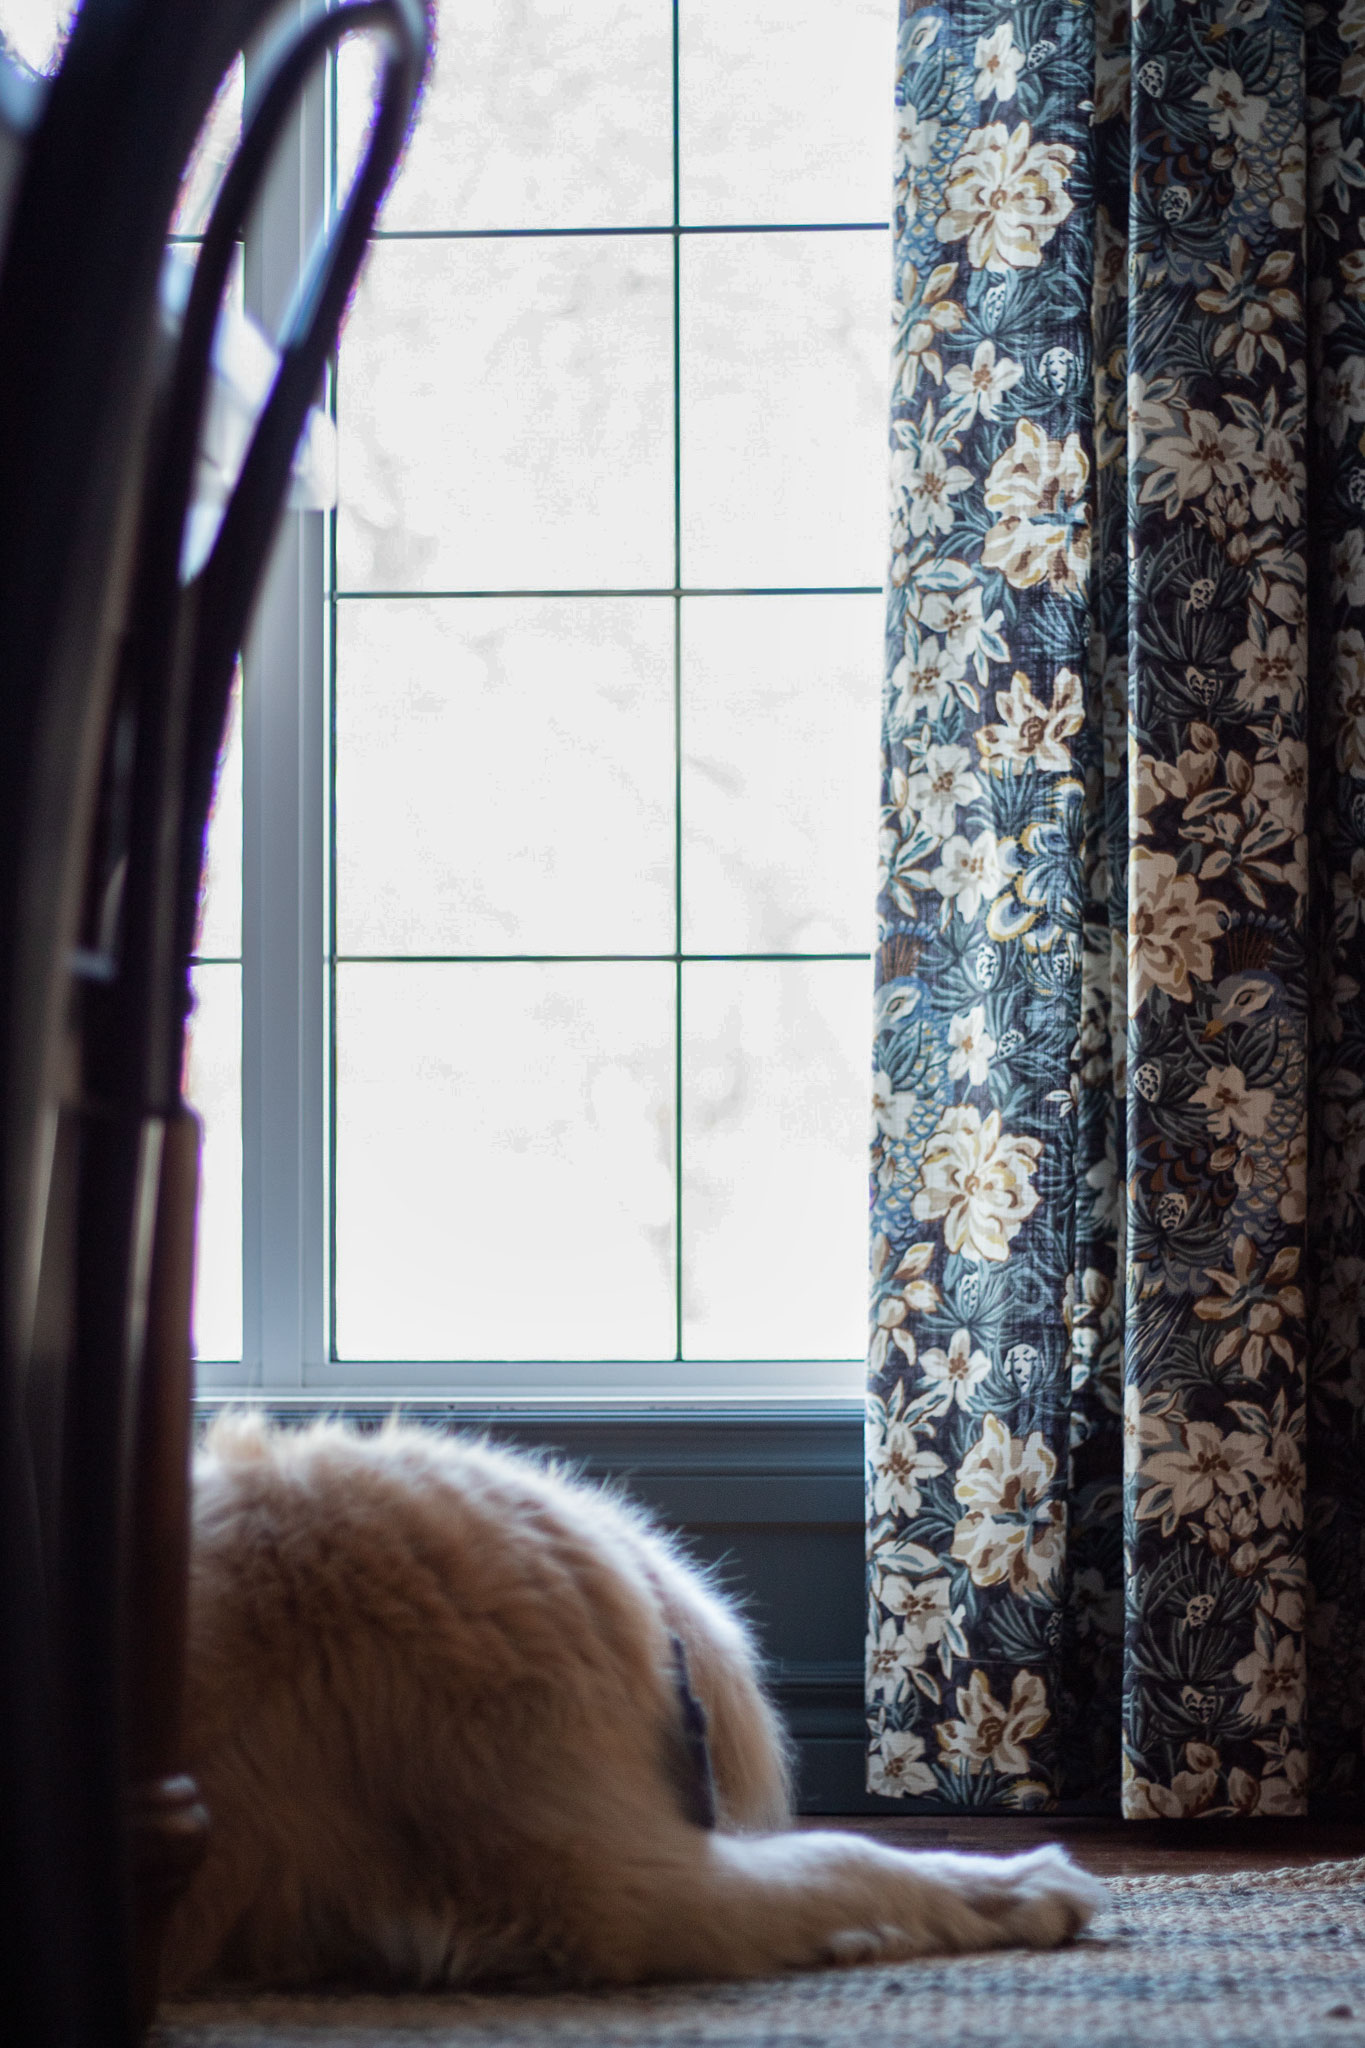 window with floral curtains almost touching the ground, dog sleeping on striped jute rug in front of window